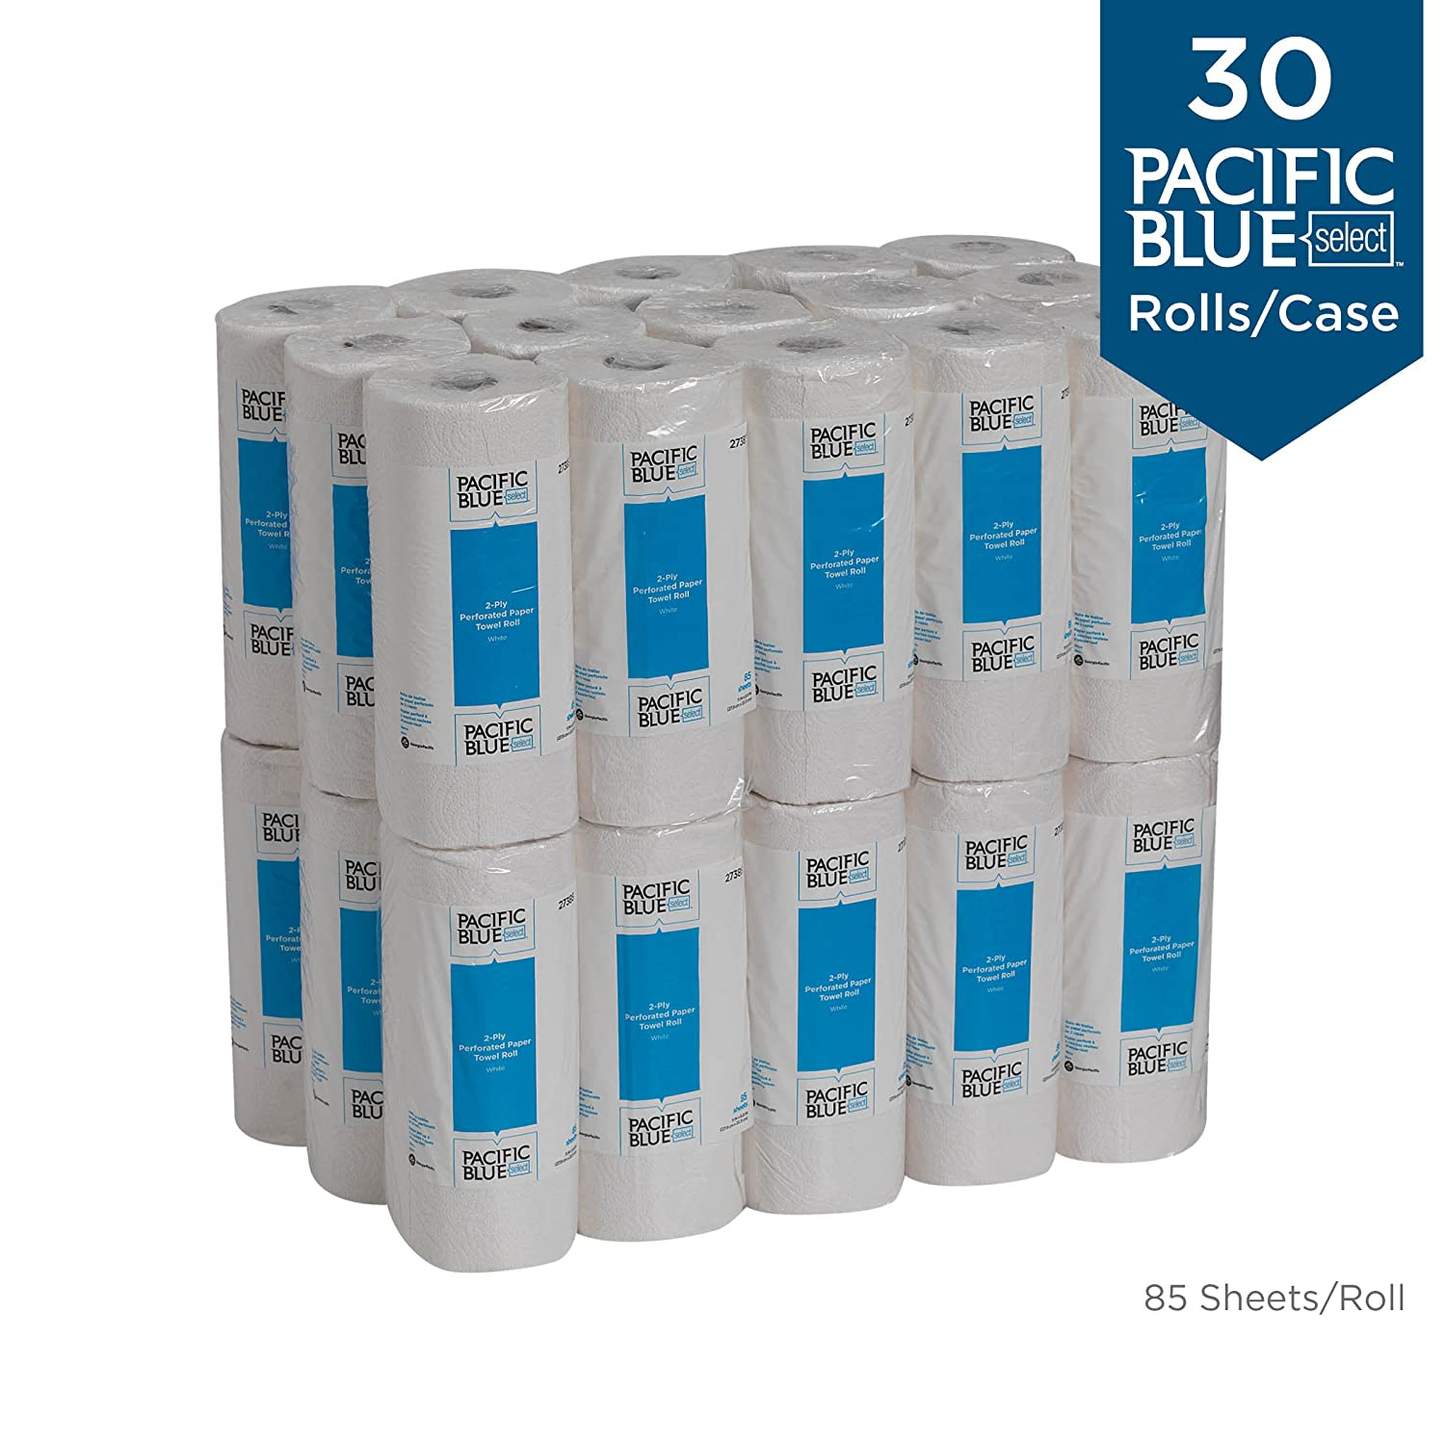 30 Paper Towel  Rolls - Pacific Blue Select 2-Ply Perforated Paper Towel Rolls